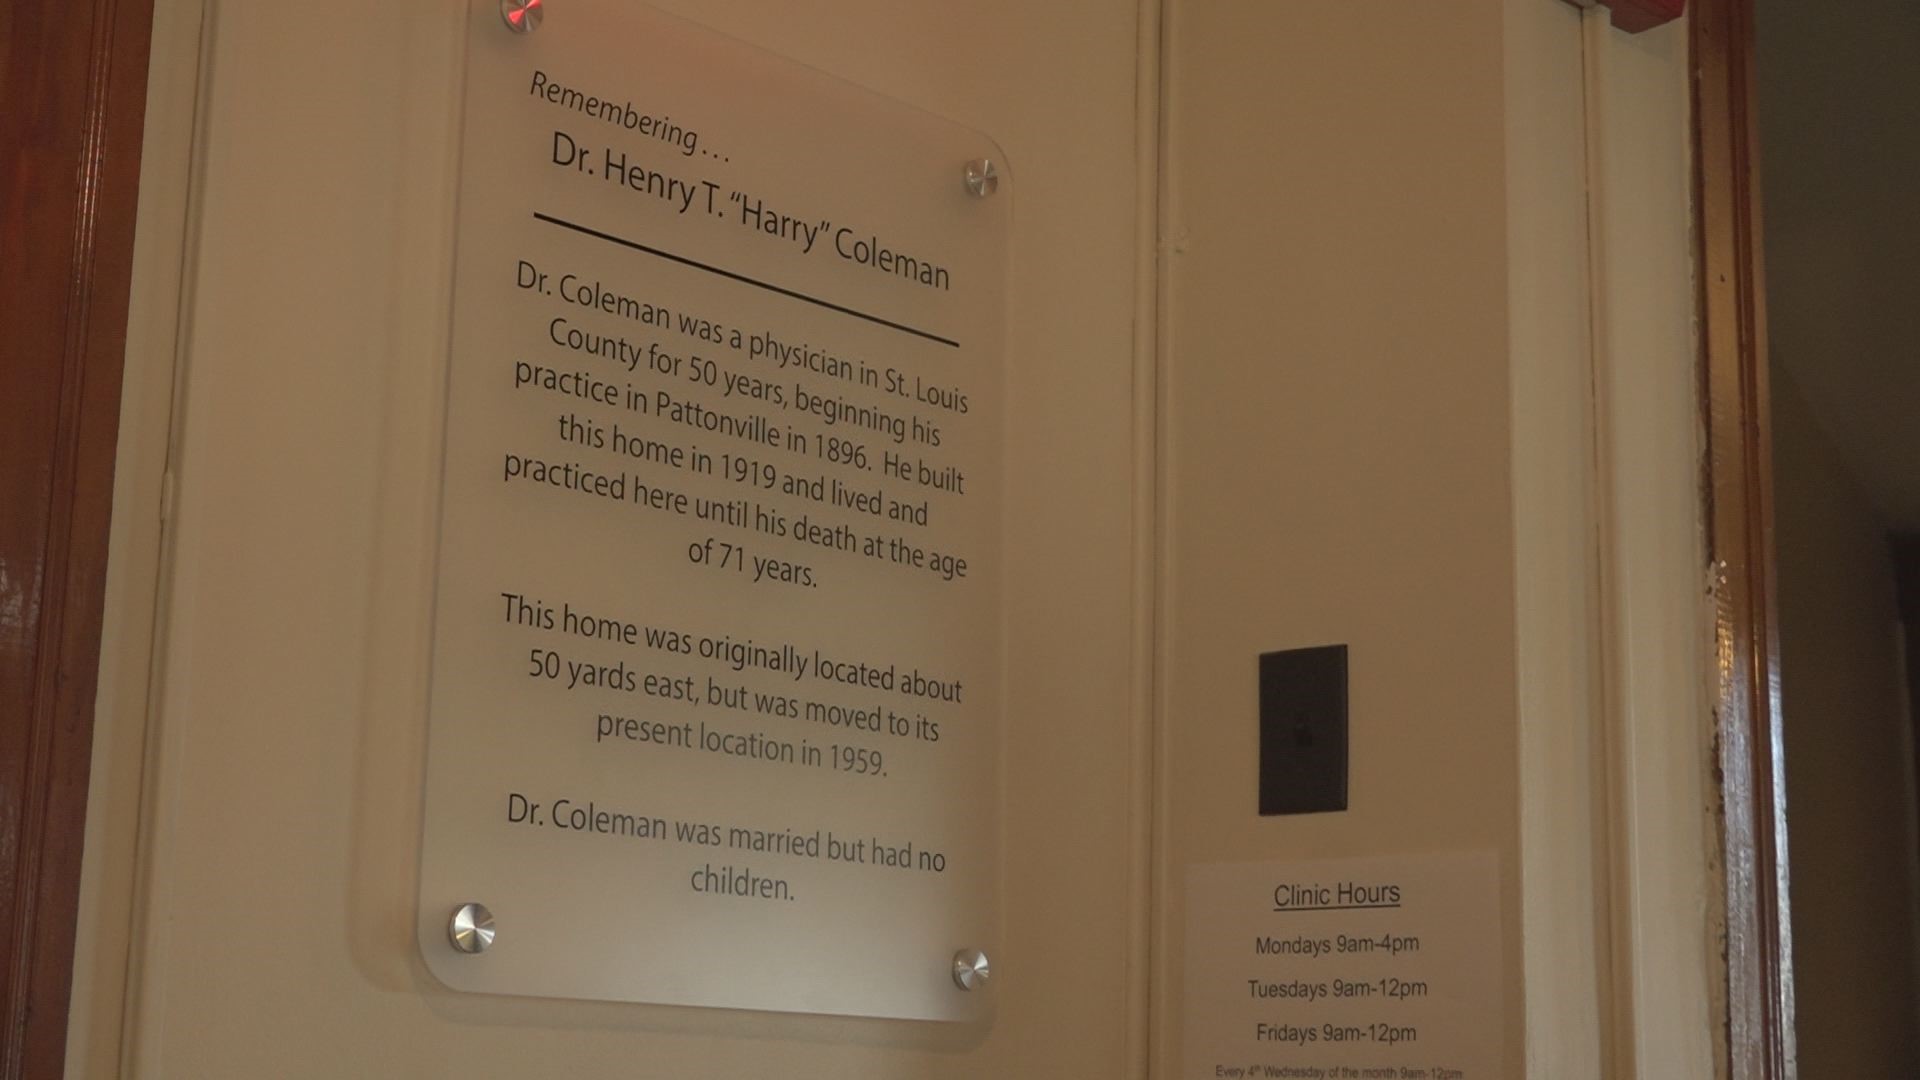 Community Connections Health Clinic is a home rooted in healthcare on St. Charles Rock Road. Dr. Henry Coleman was a physician in the area for 50 years